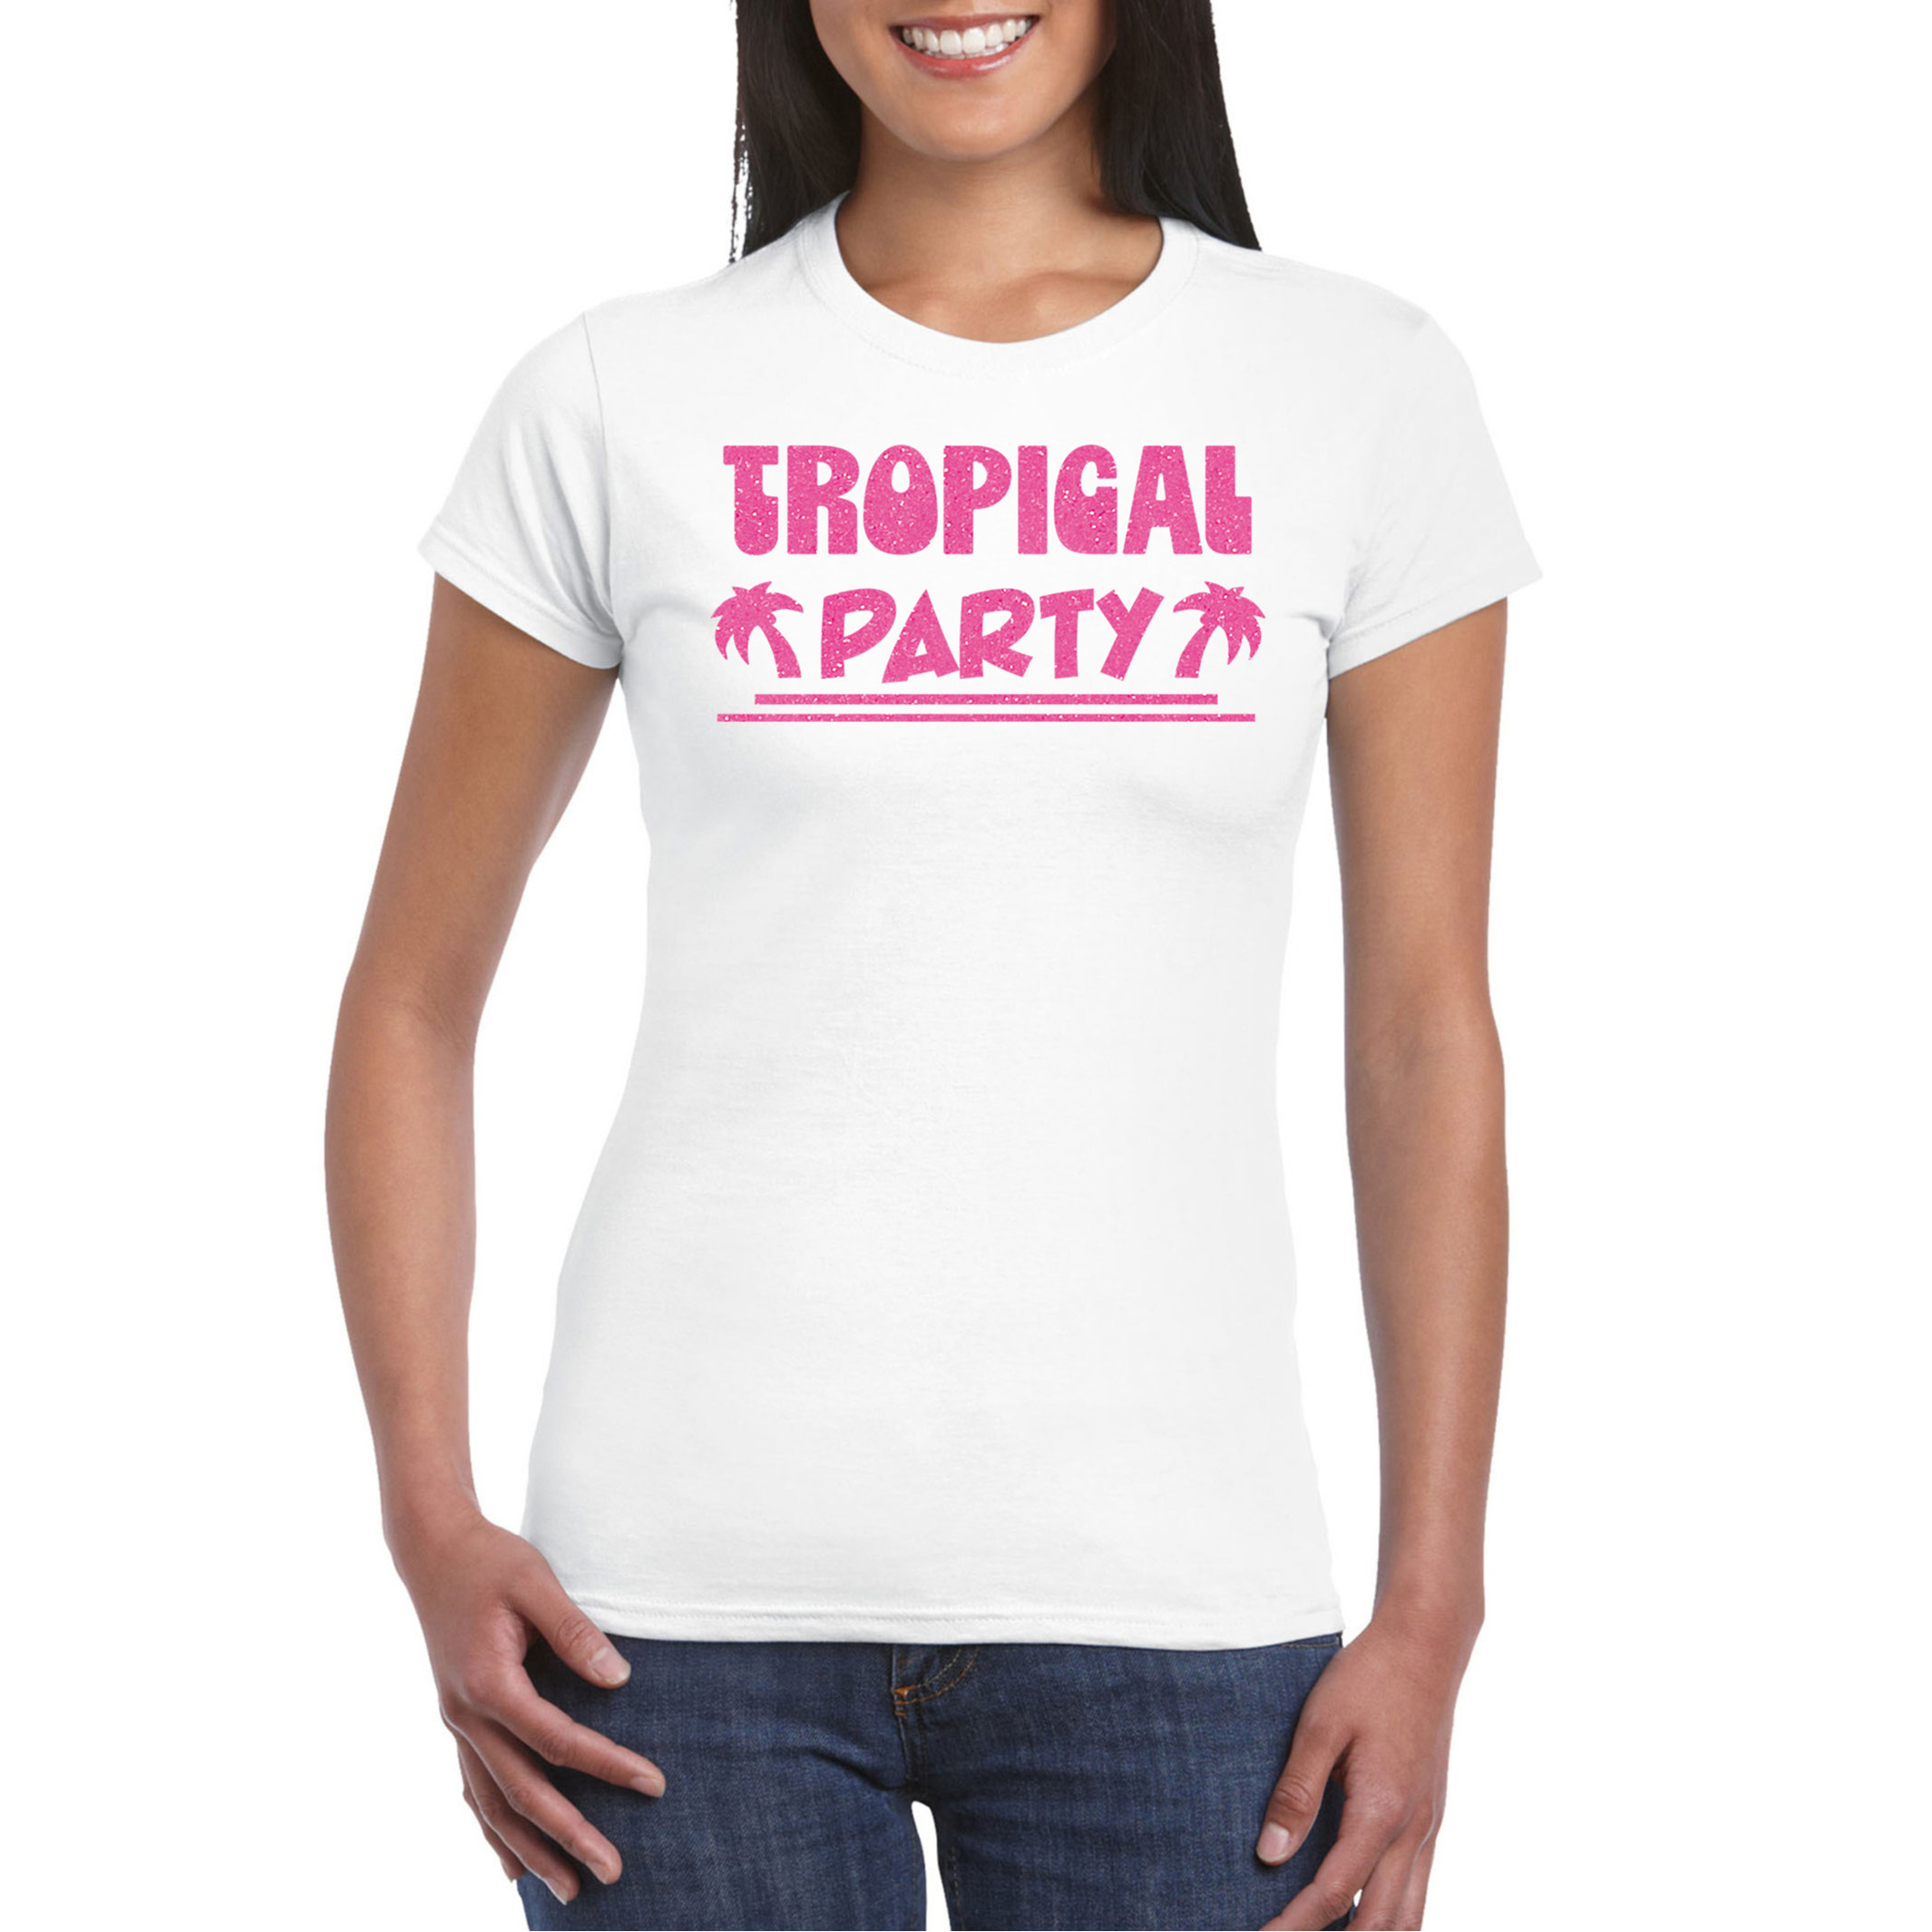 Toppers Tropical party T-shirt voor dames met glitters wit-roze carnaval-themafeest